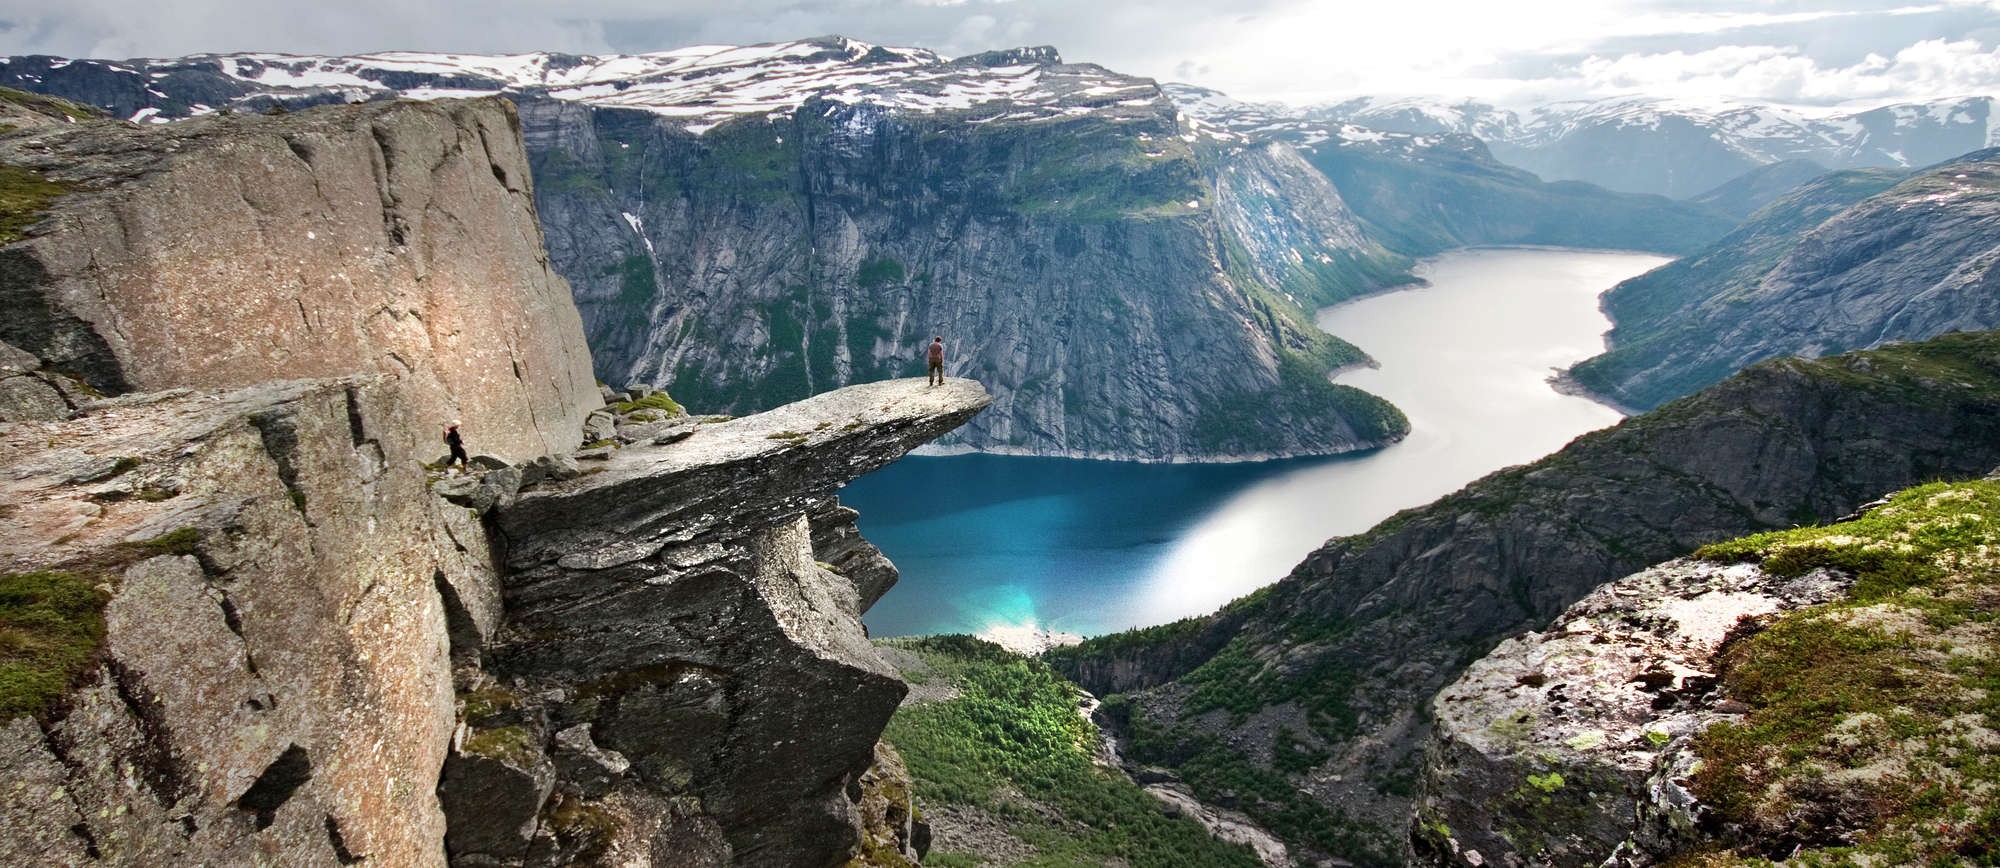 Fjord Sea Cliff Canyon Snow Clouds Rock Norway Landscape Nature Water Mountains Panorama Trolltunga 2000x868